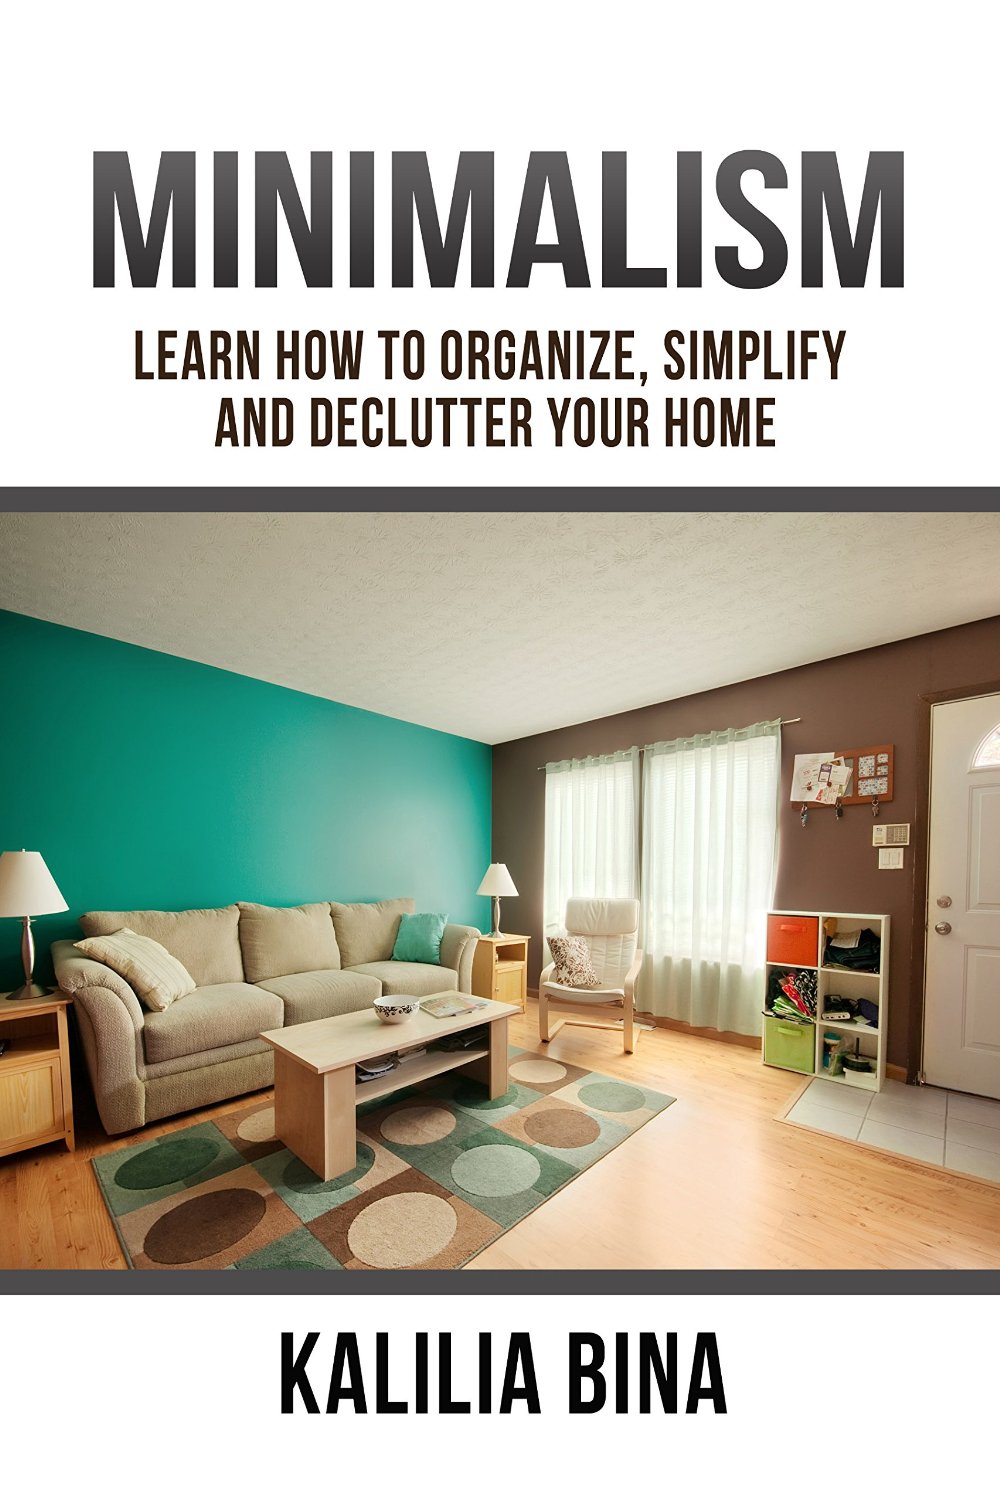 FREE: Minimalism: Learn How To Organize, Simplify And Declutter Your Home by Kalilia Bina